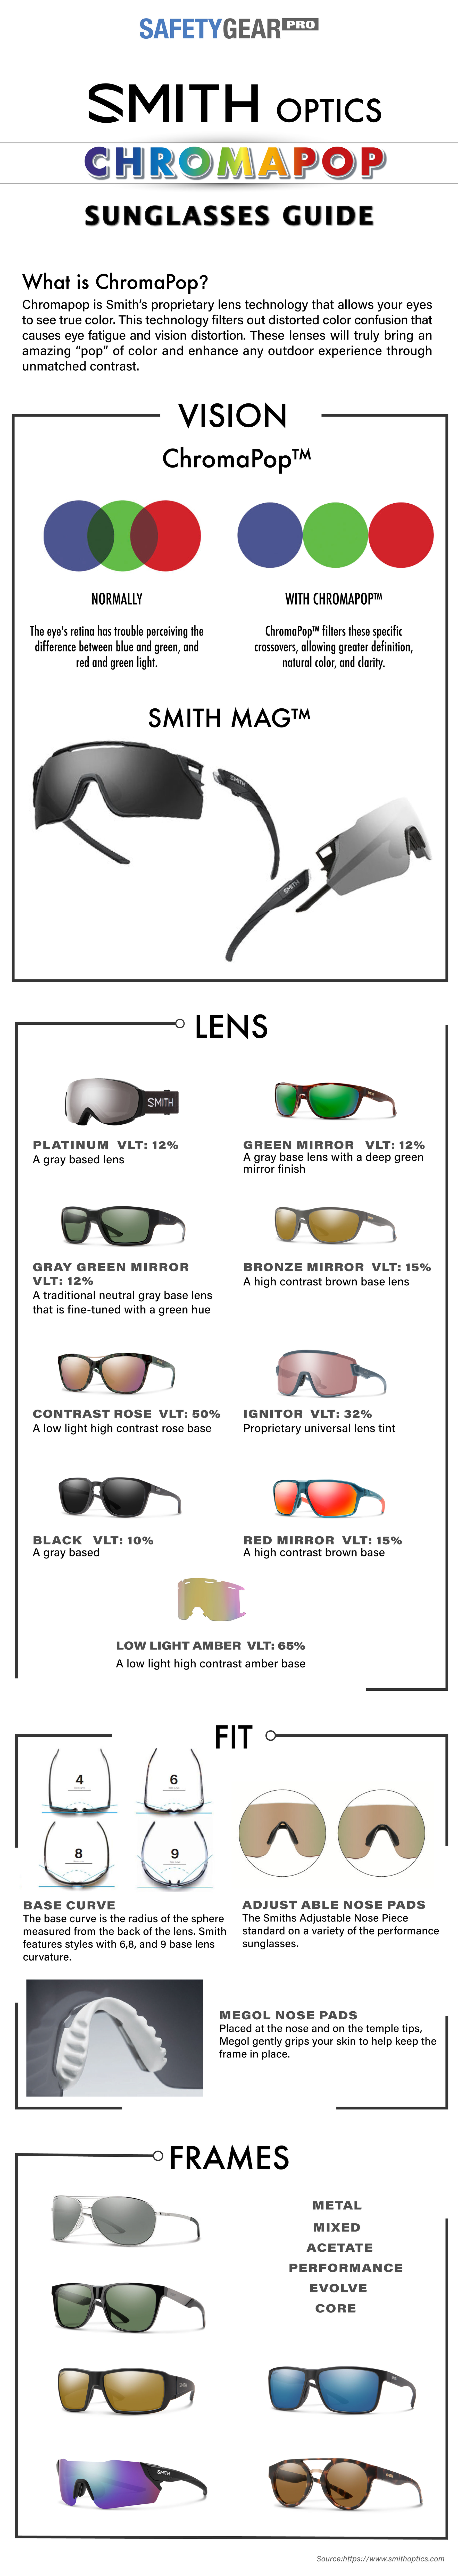 Smith ChromaPop Sunglasses and Goggles Guide | Safety Gear Pro